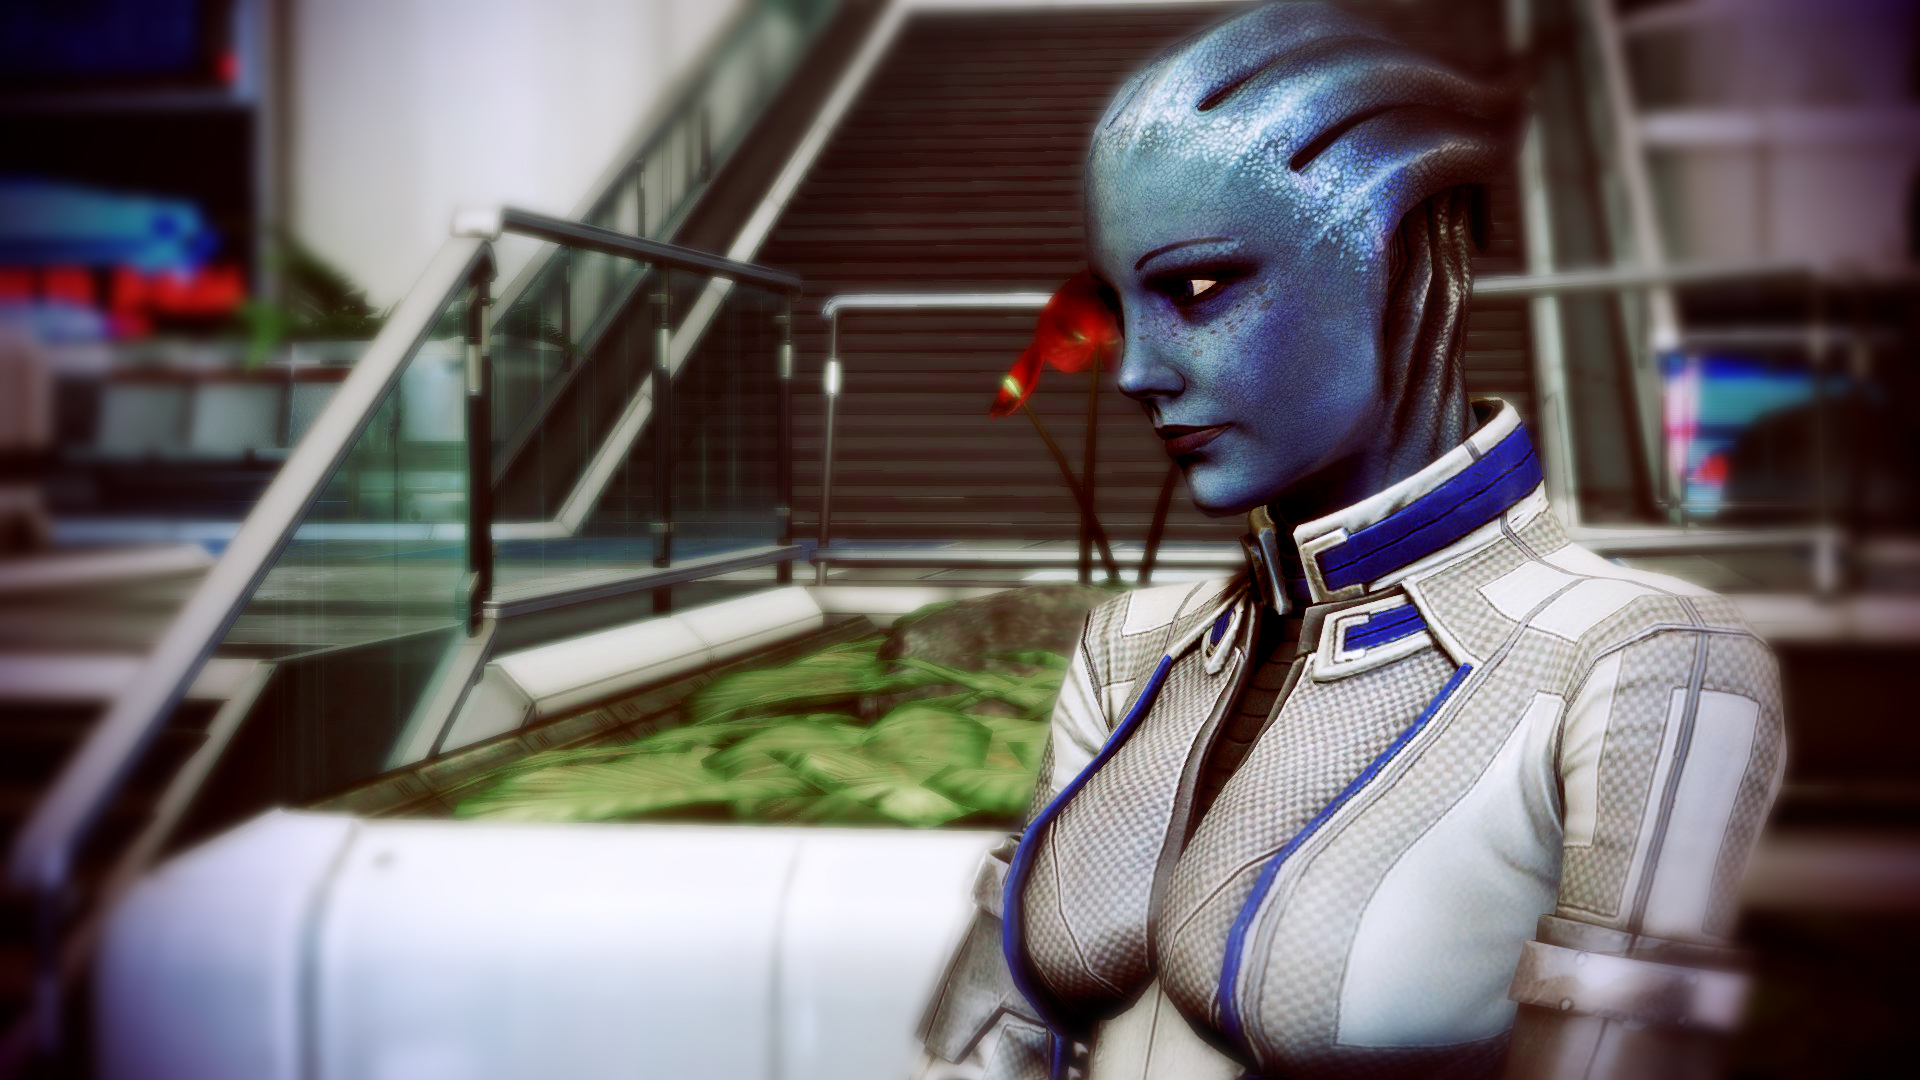 Free download wallpaper Mass Effect, Video Game, Mass Effect 3, Liara T'soni on your PC desktop